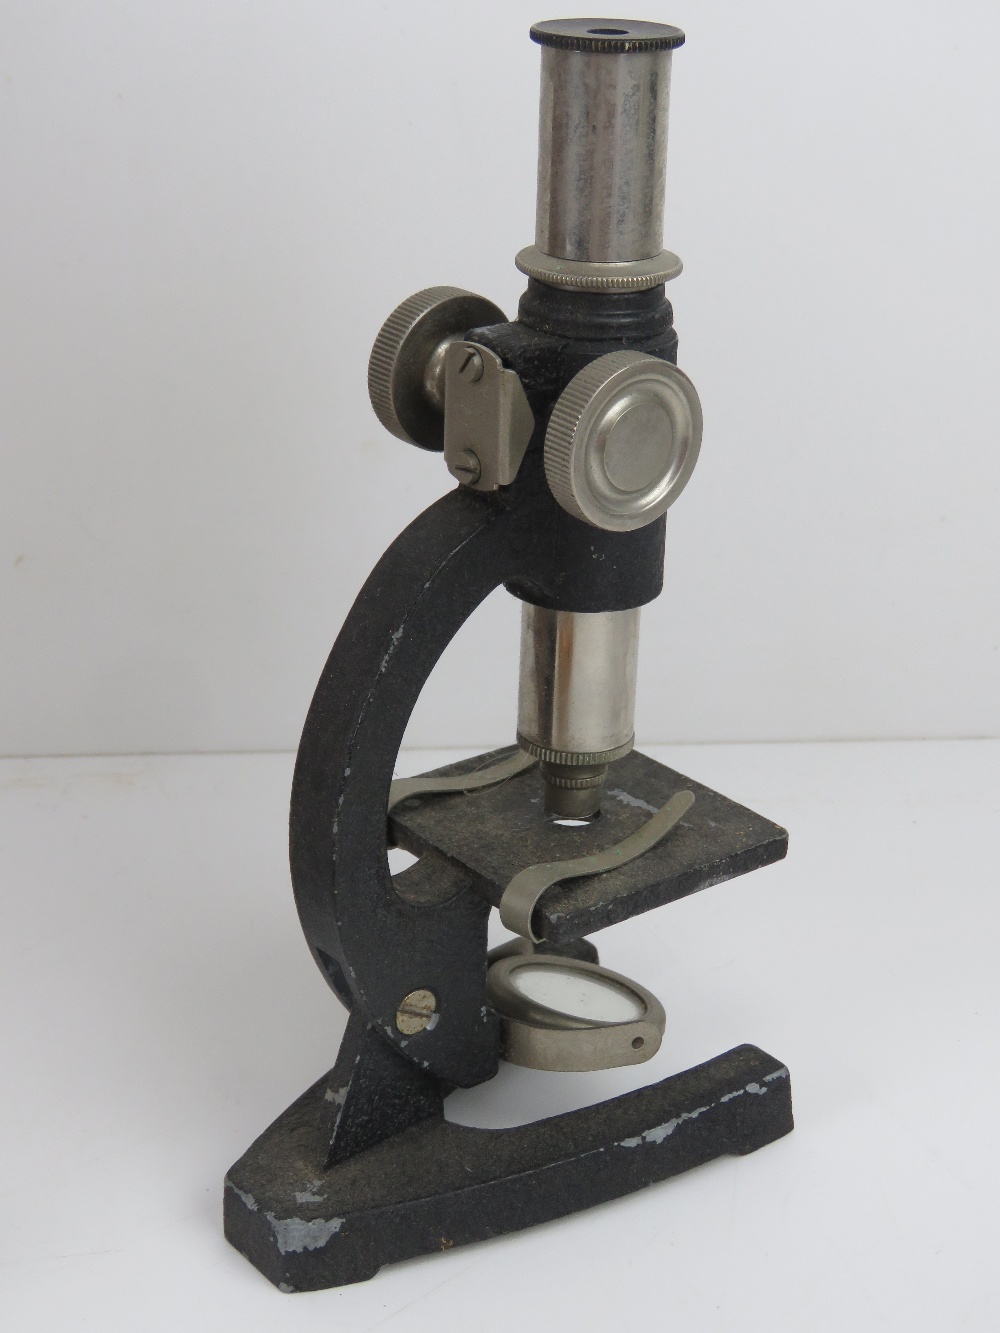 A Britex Pioneer II microscope in box with instructions and set of six slides. - Image 5 of 6